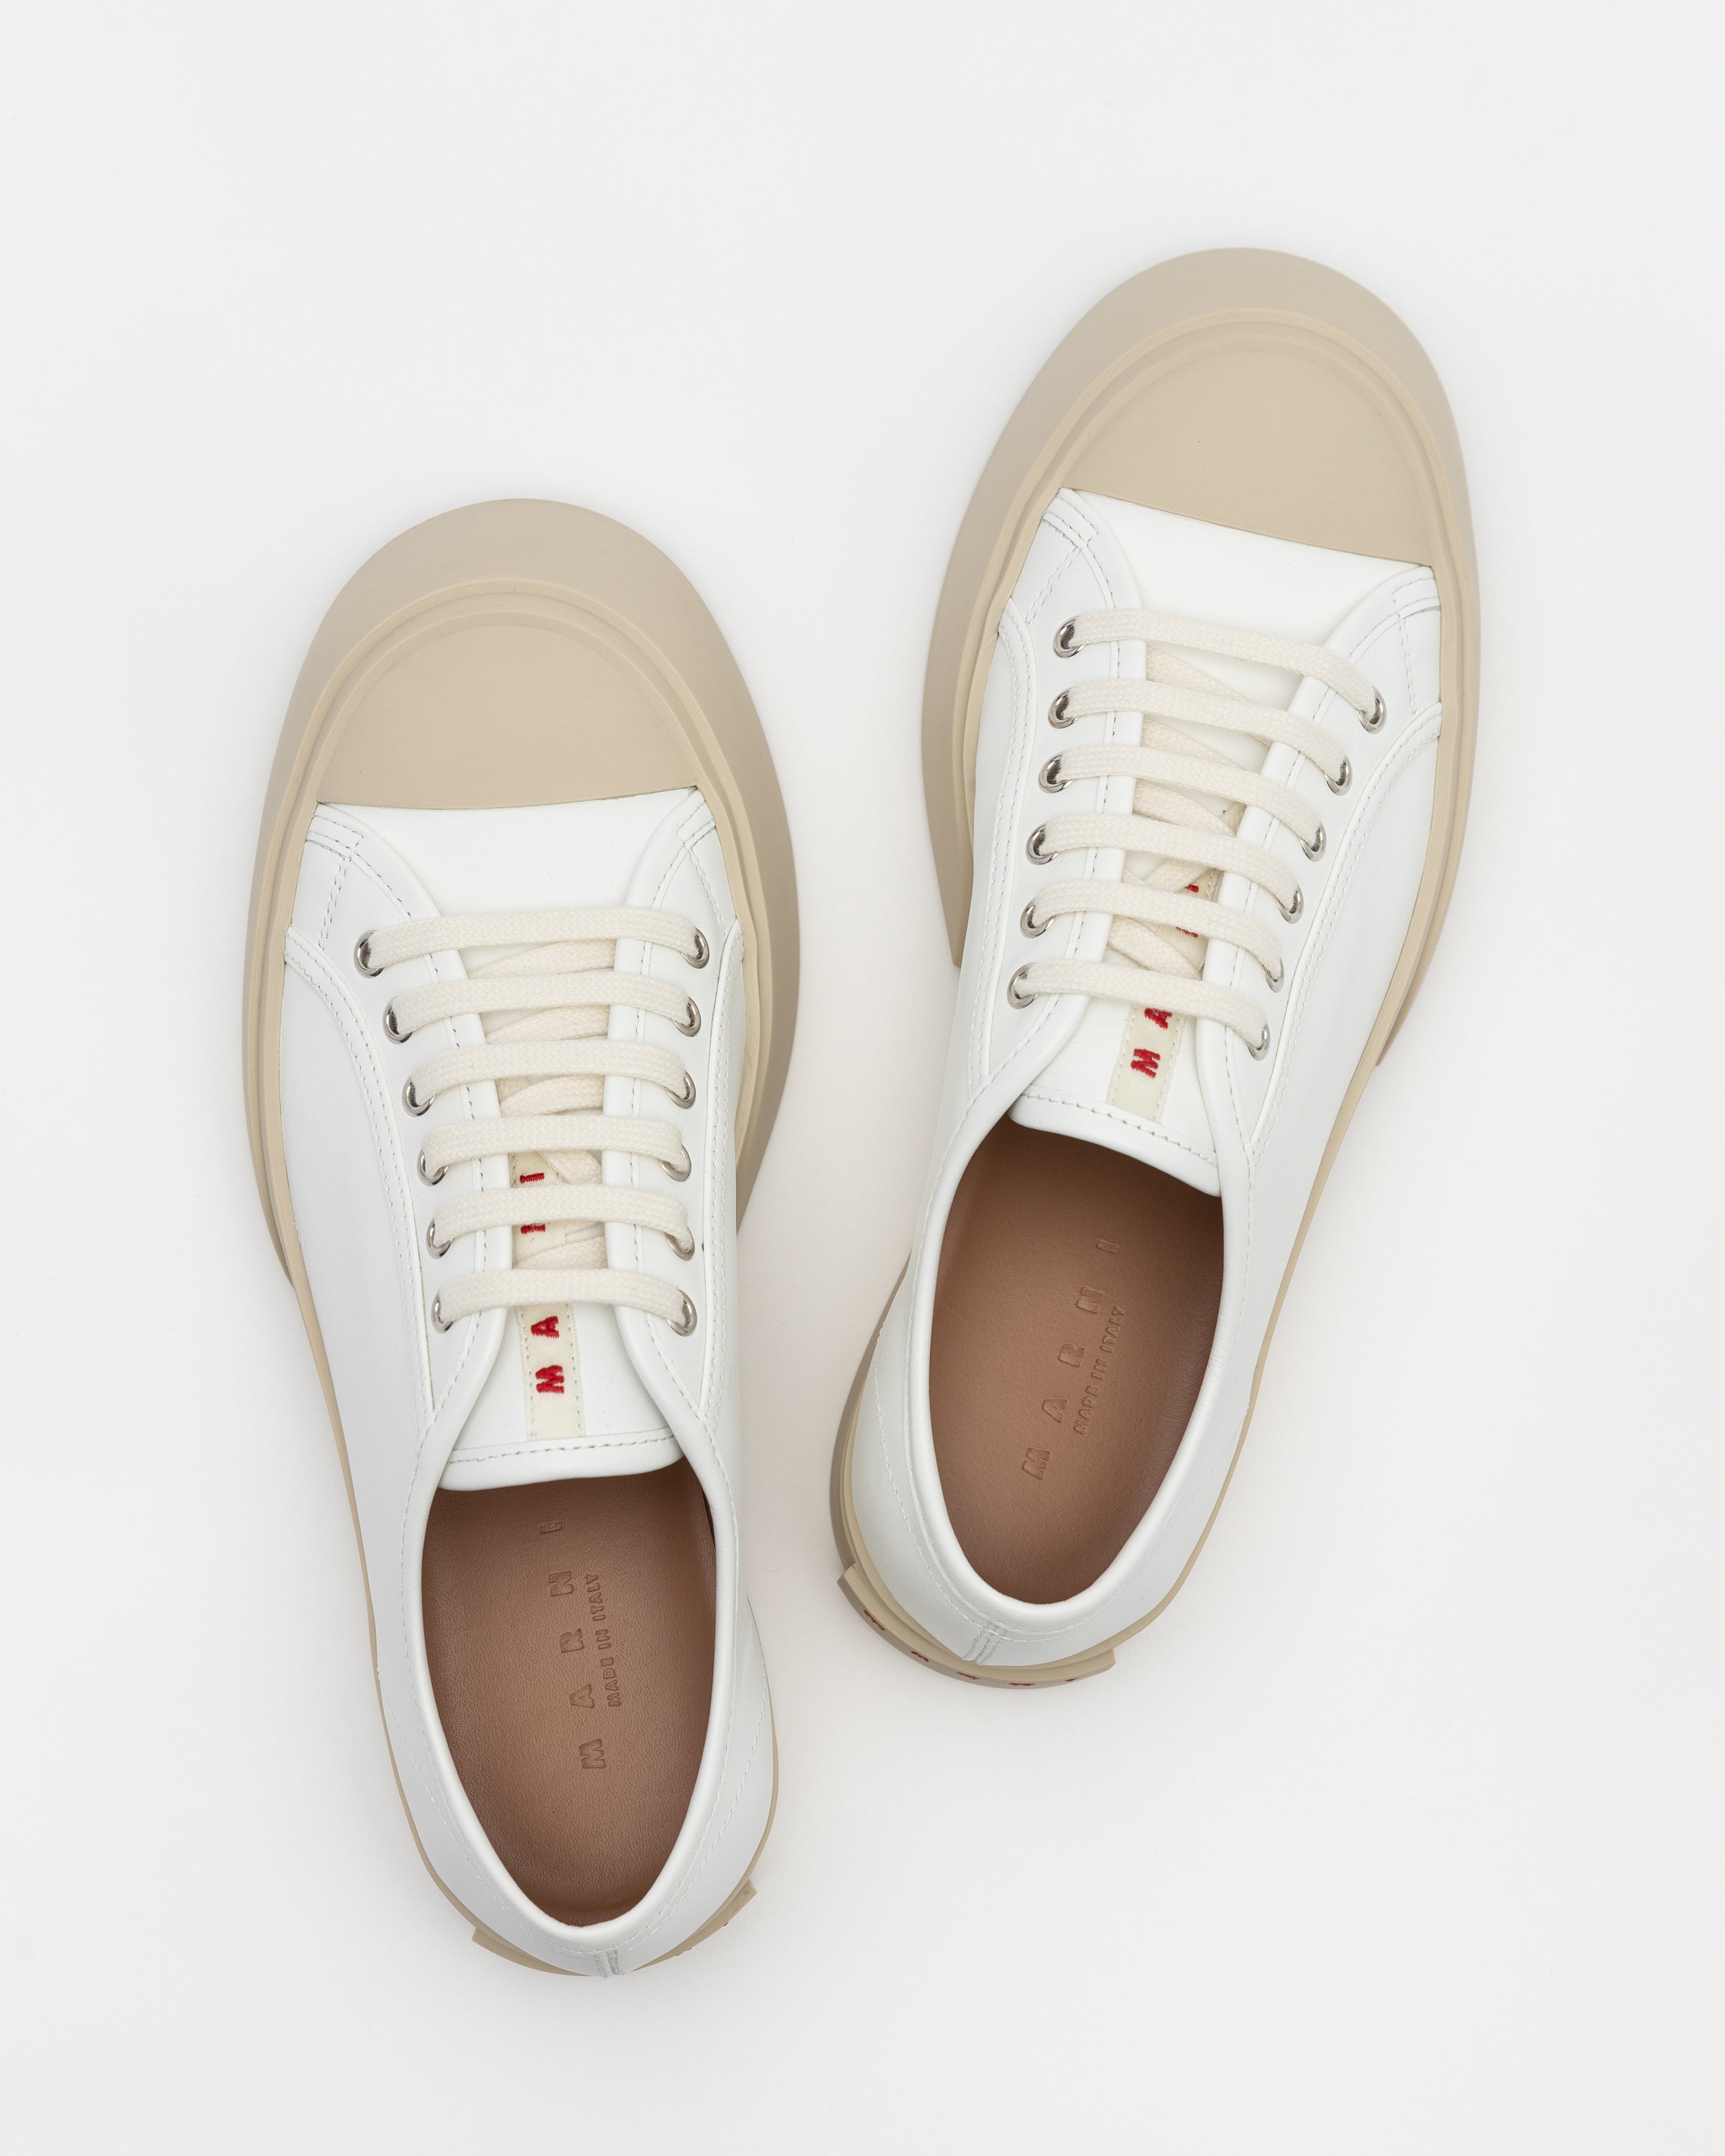 Pablo Lace-Up Sneaker in White